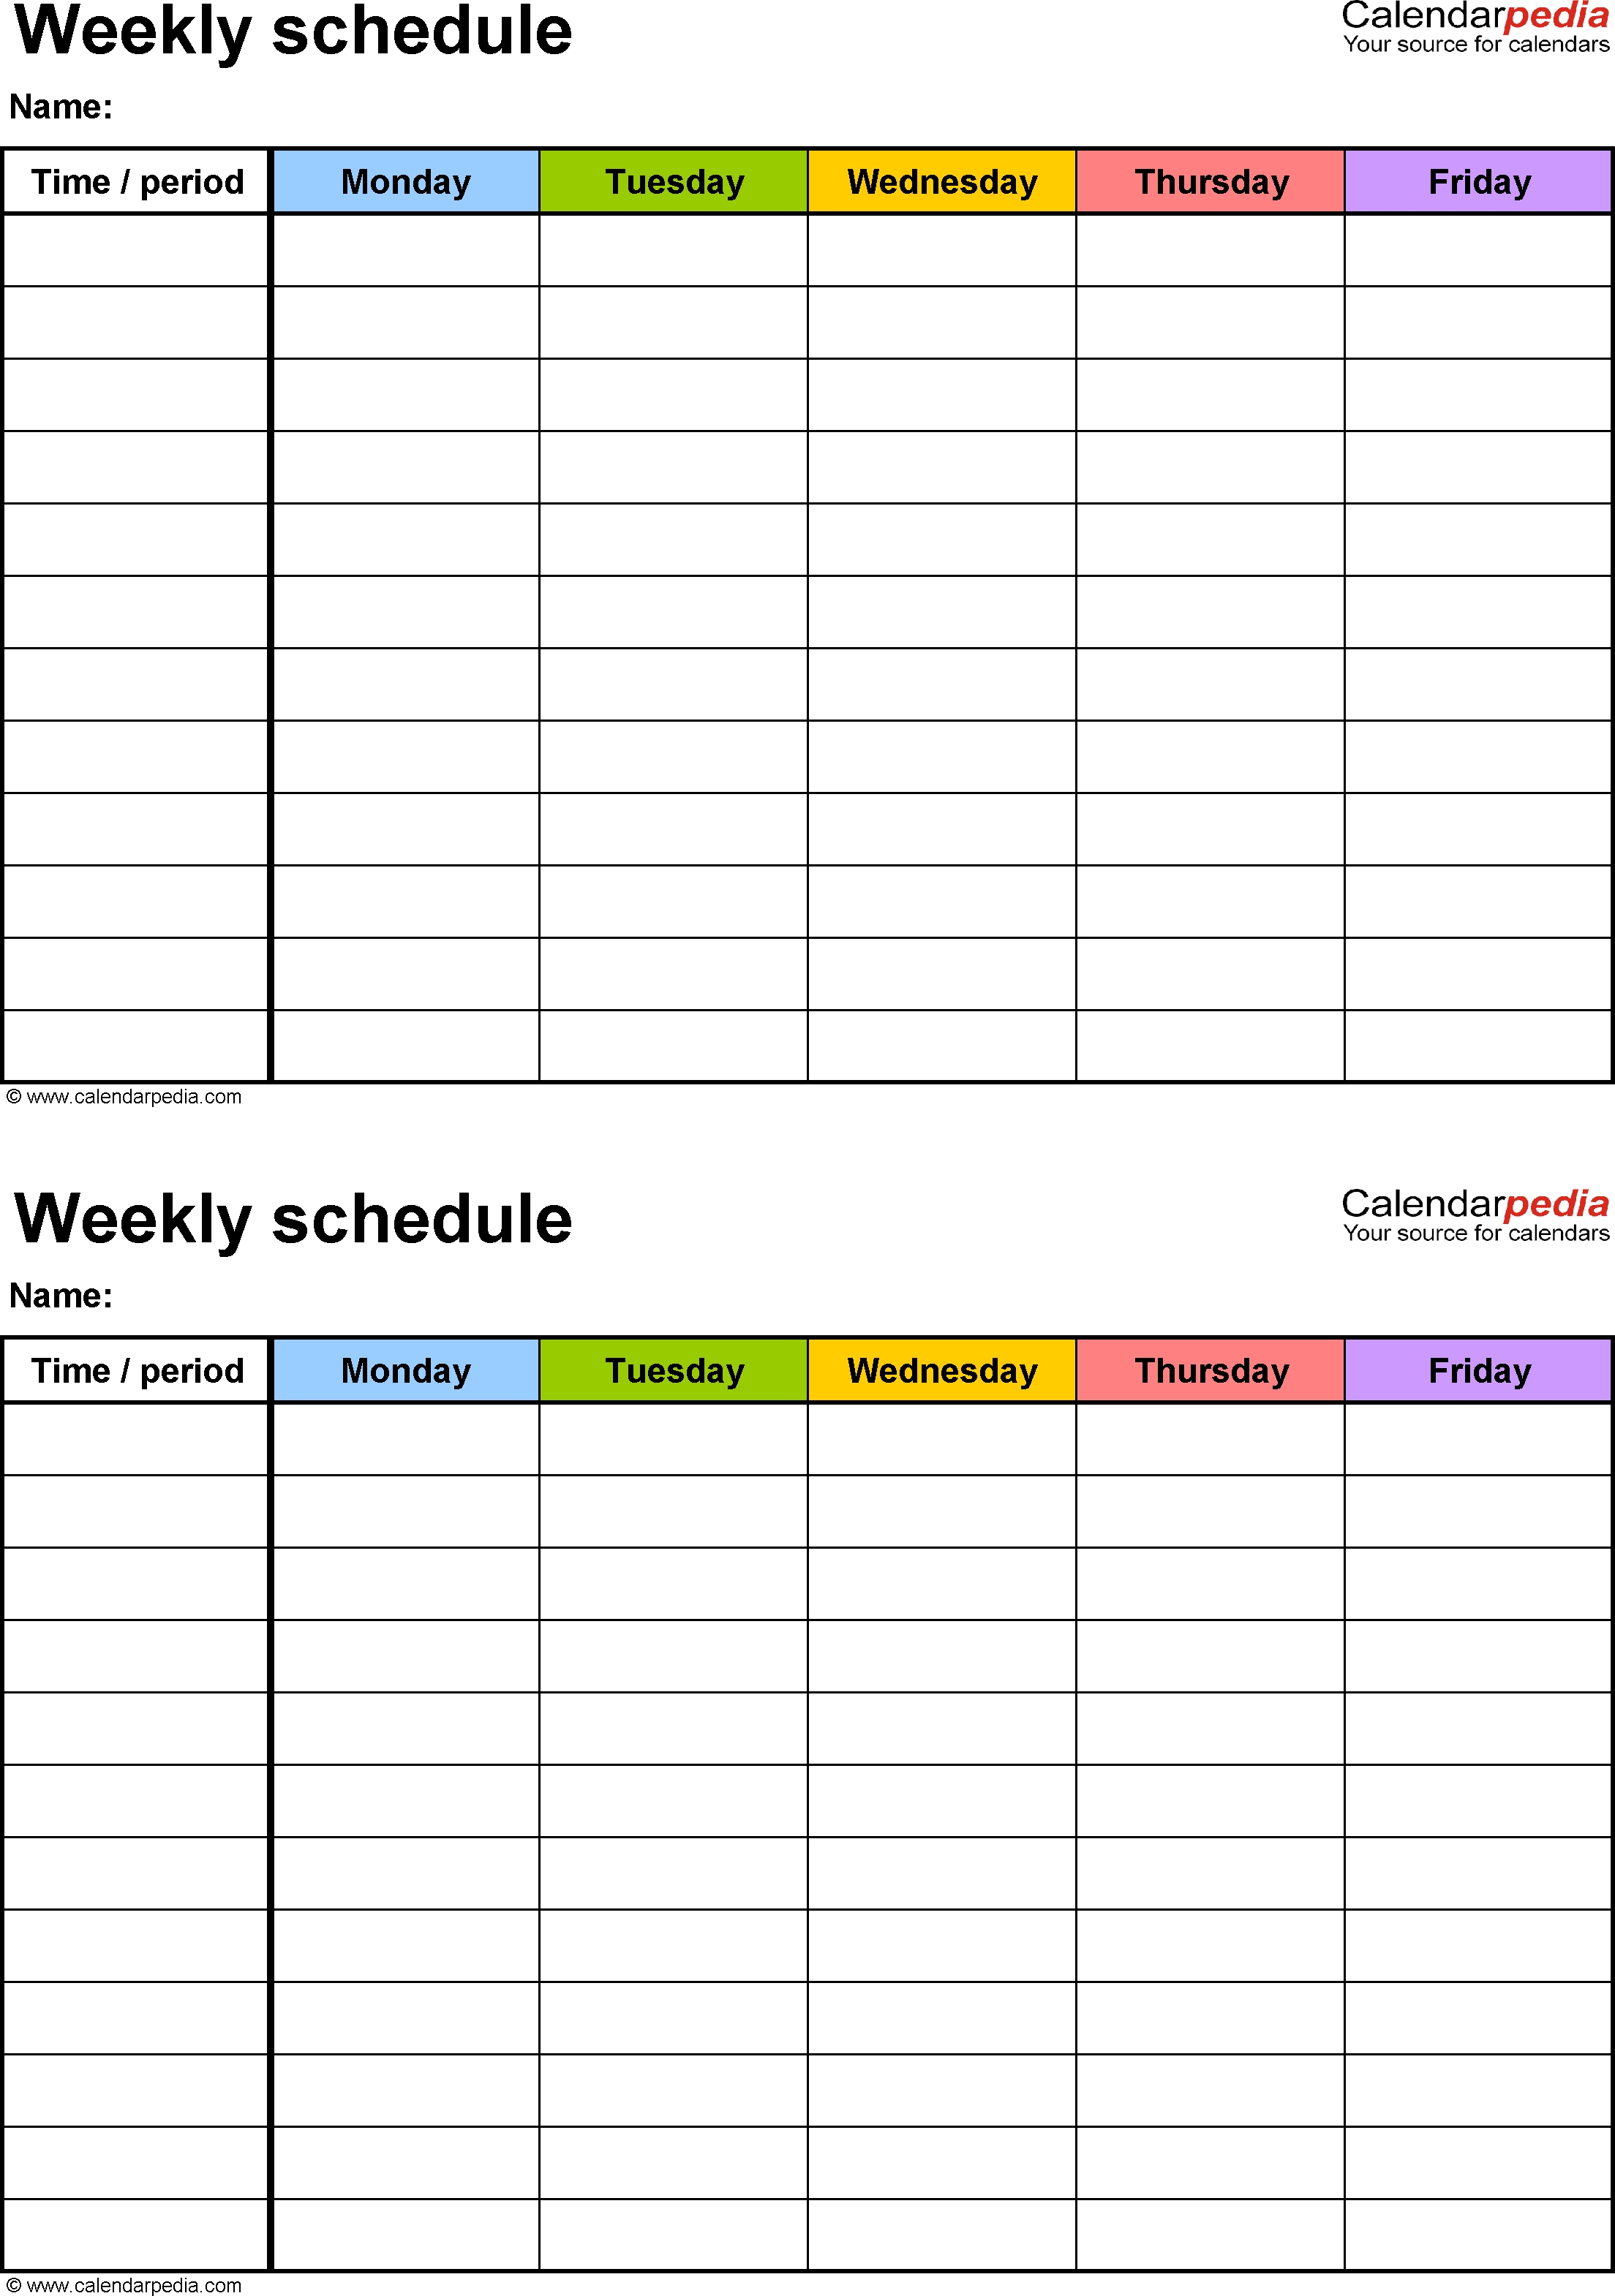 Free Weekly Schedule Templates For Word - 18 Templates pertaining to Two Week Calendar Template Free